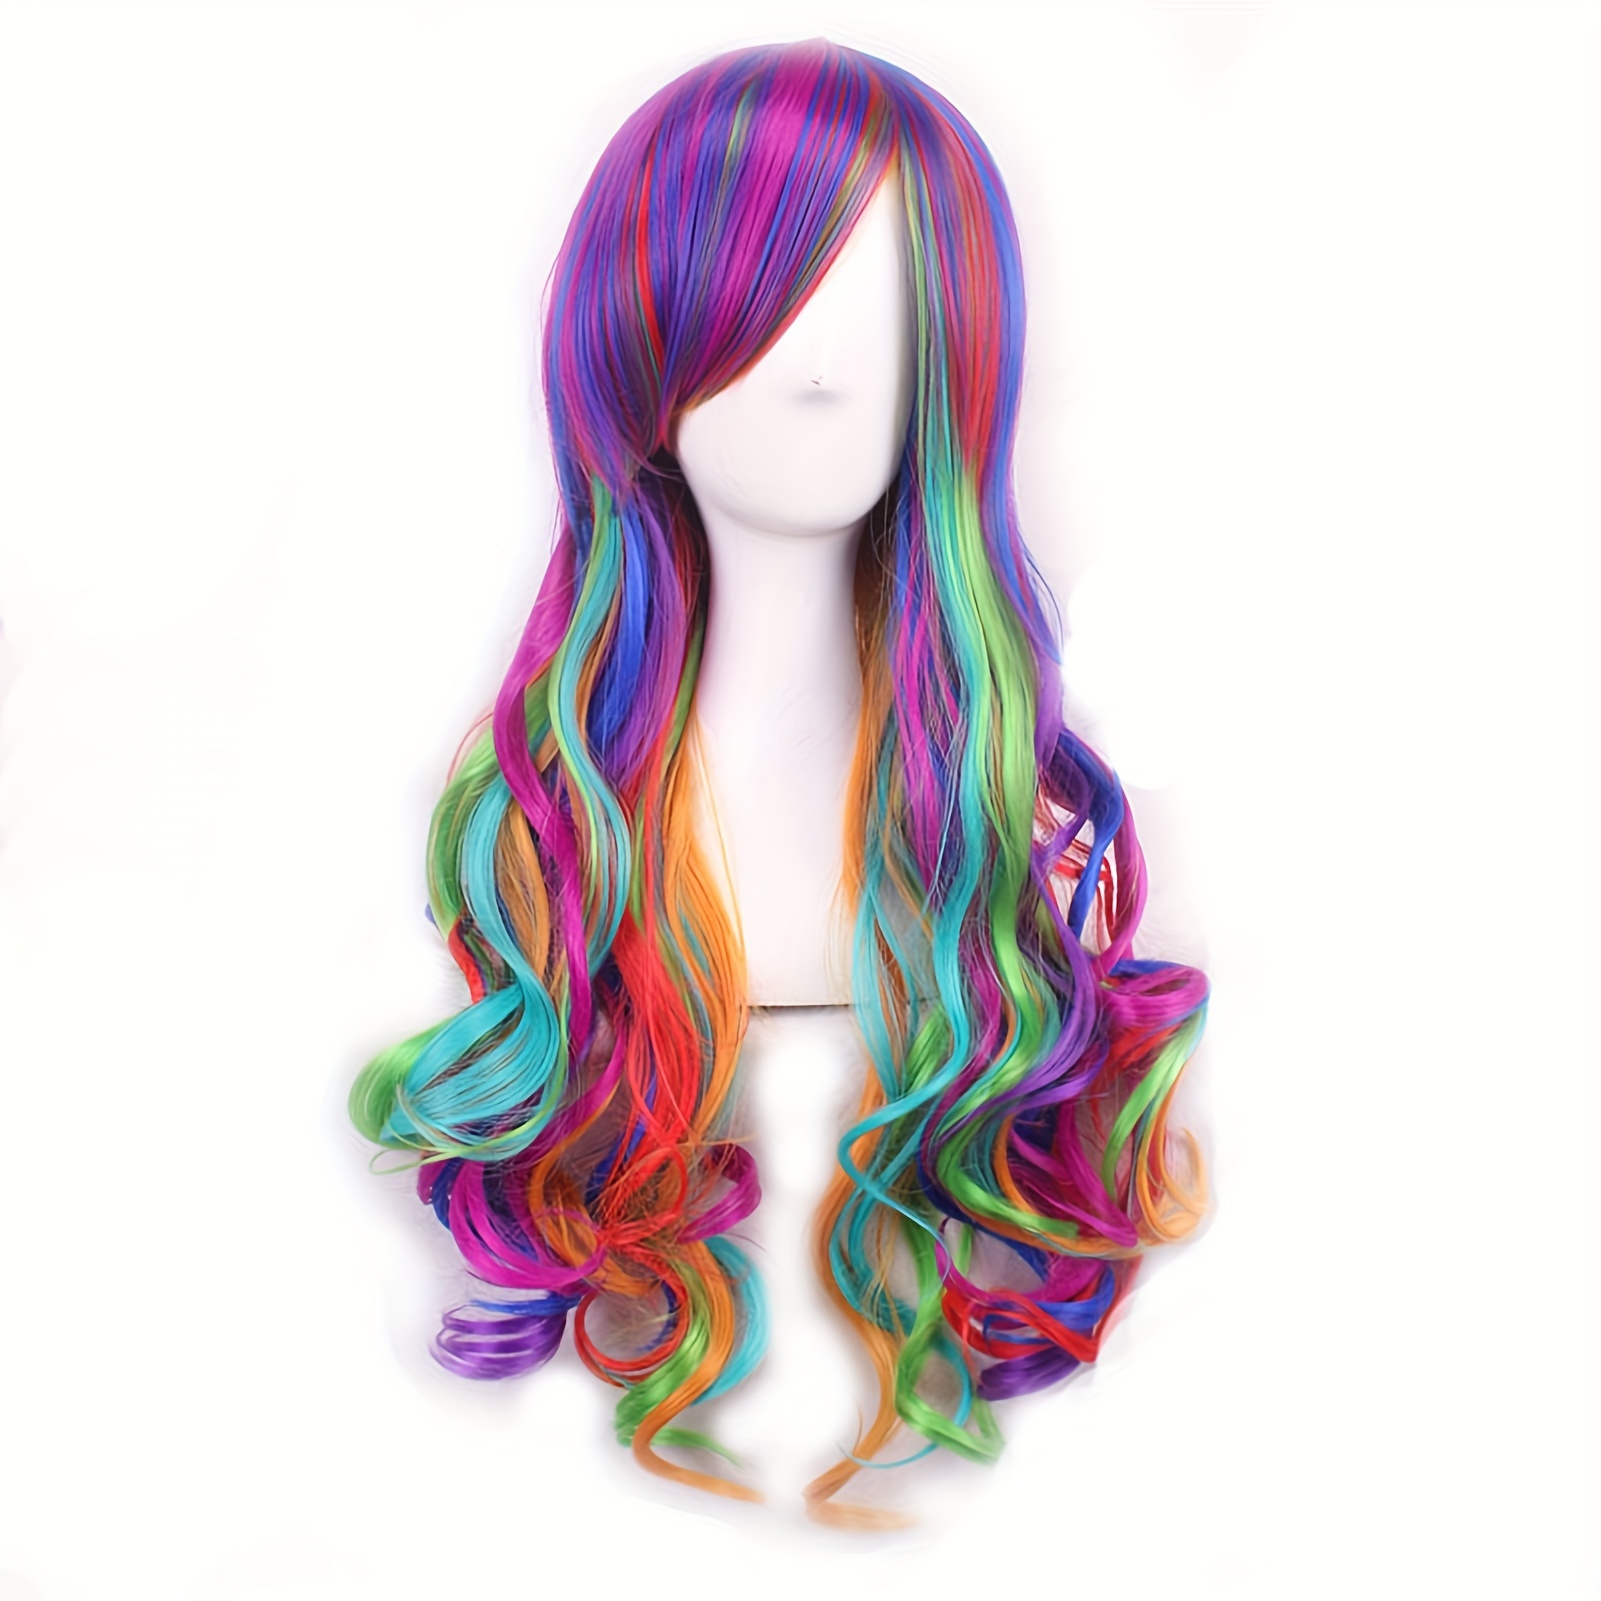 

Rainbow Curly Wavy Full Wig For Women, Elastic Net Cap, Suitable For All, Anime Cosplay Costume Party Hair Wigs